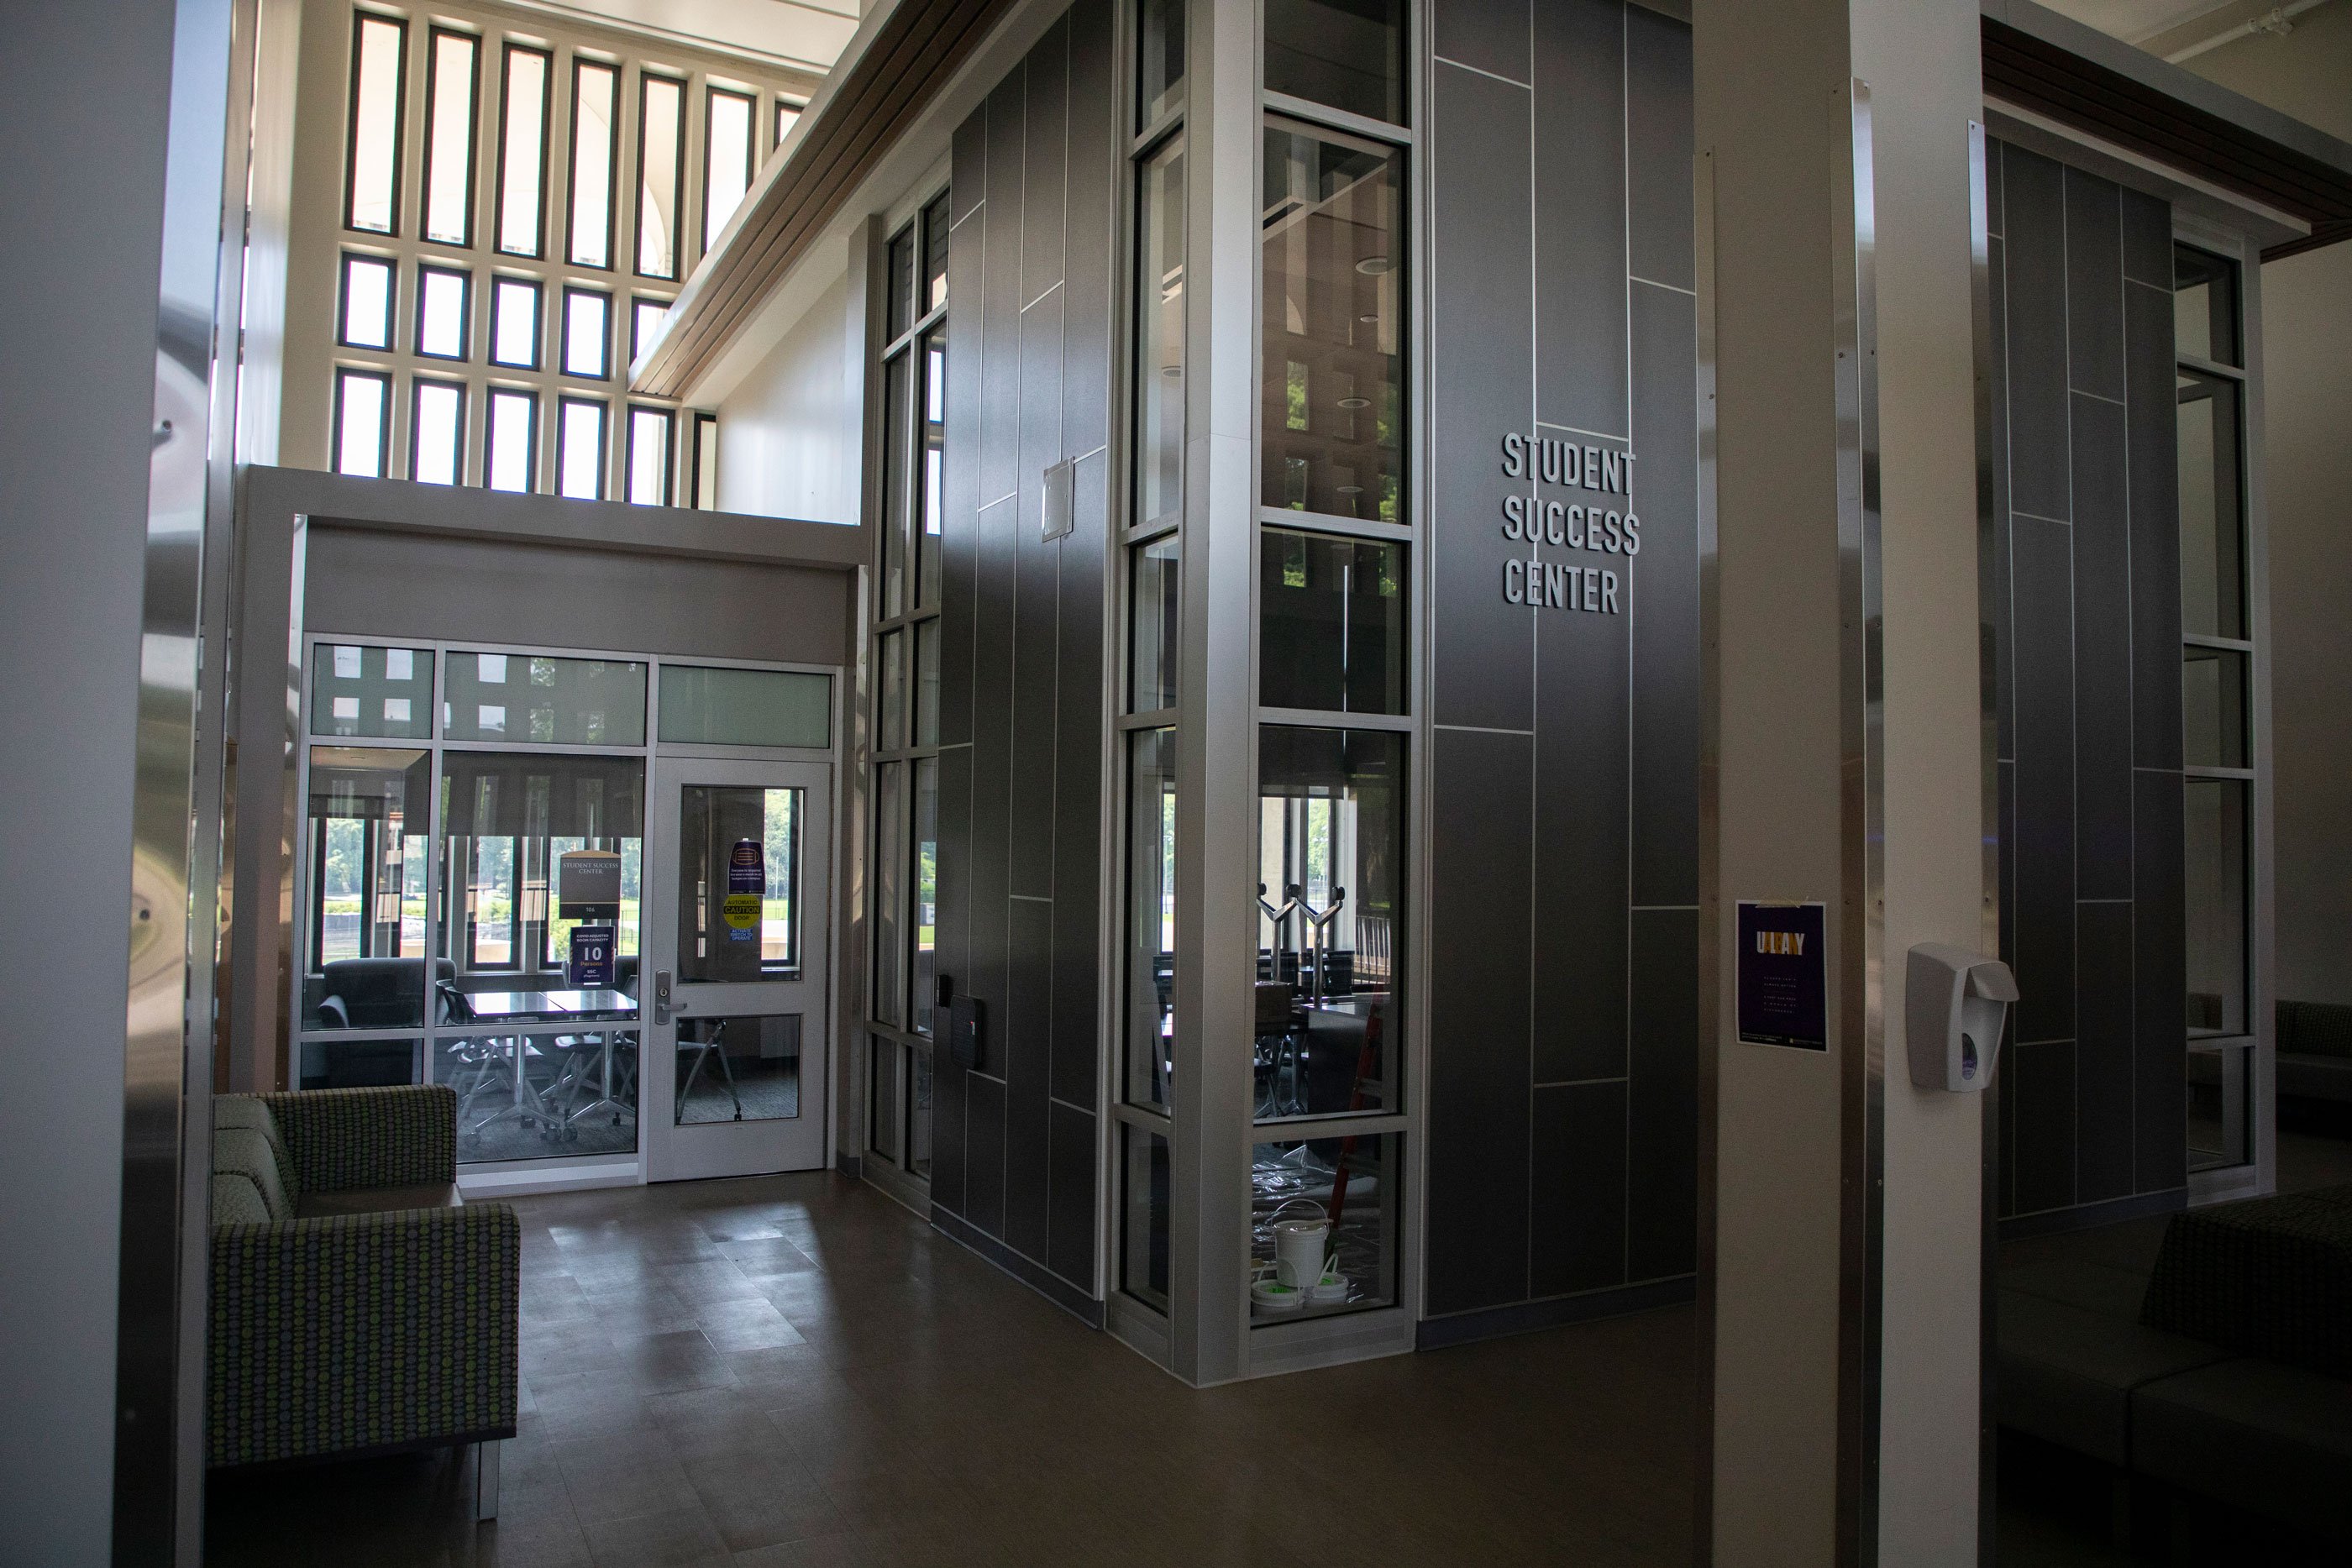 The door to a Student Success Center on Dutch Quad